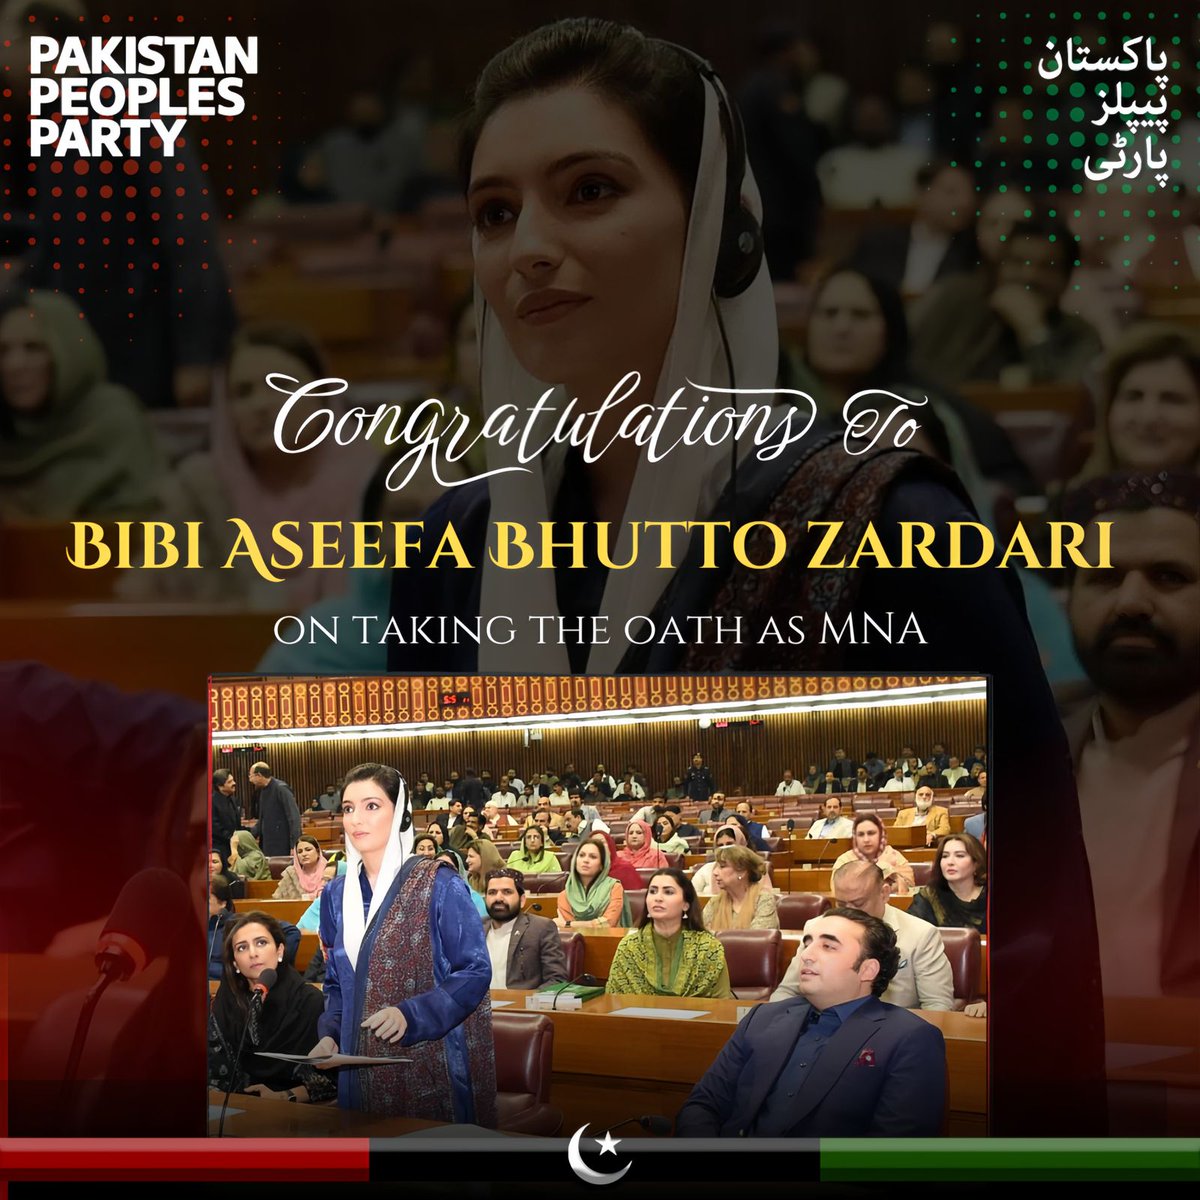 Congratulations to Bibi @AseefaBZ on taking oath as MNA. The vision of Shaheed Mohtarma Benazir Bhutto continues to shine and inspire entire Pakistan and its people of all backgrounds.